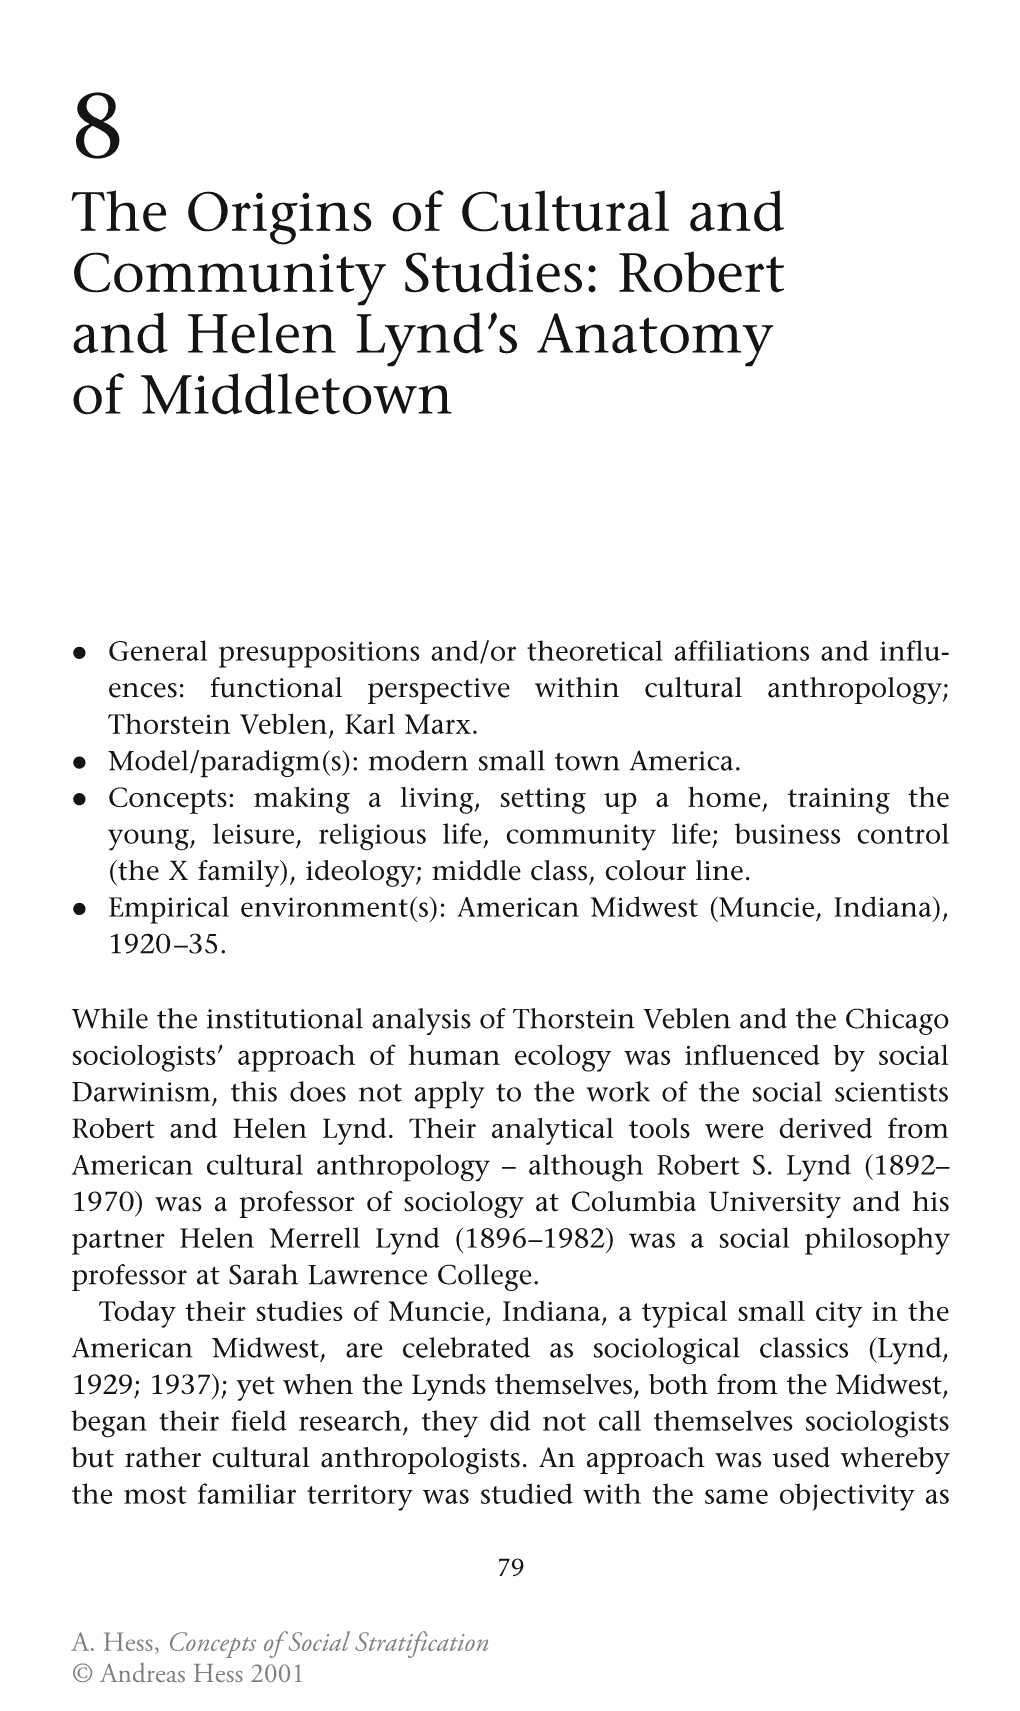 Robert and Helen Lynd's Anatomy of Middletown